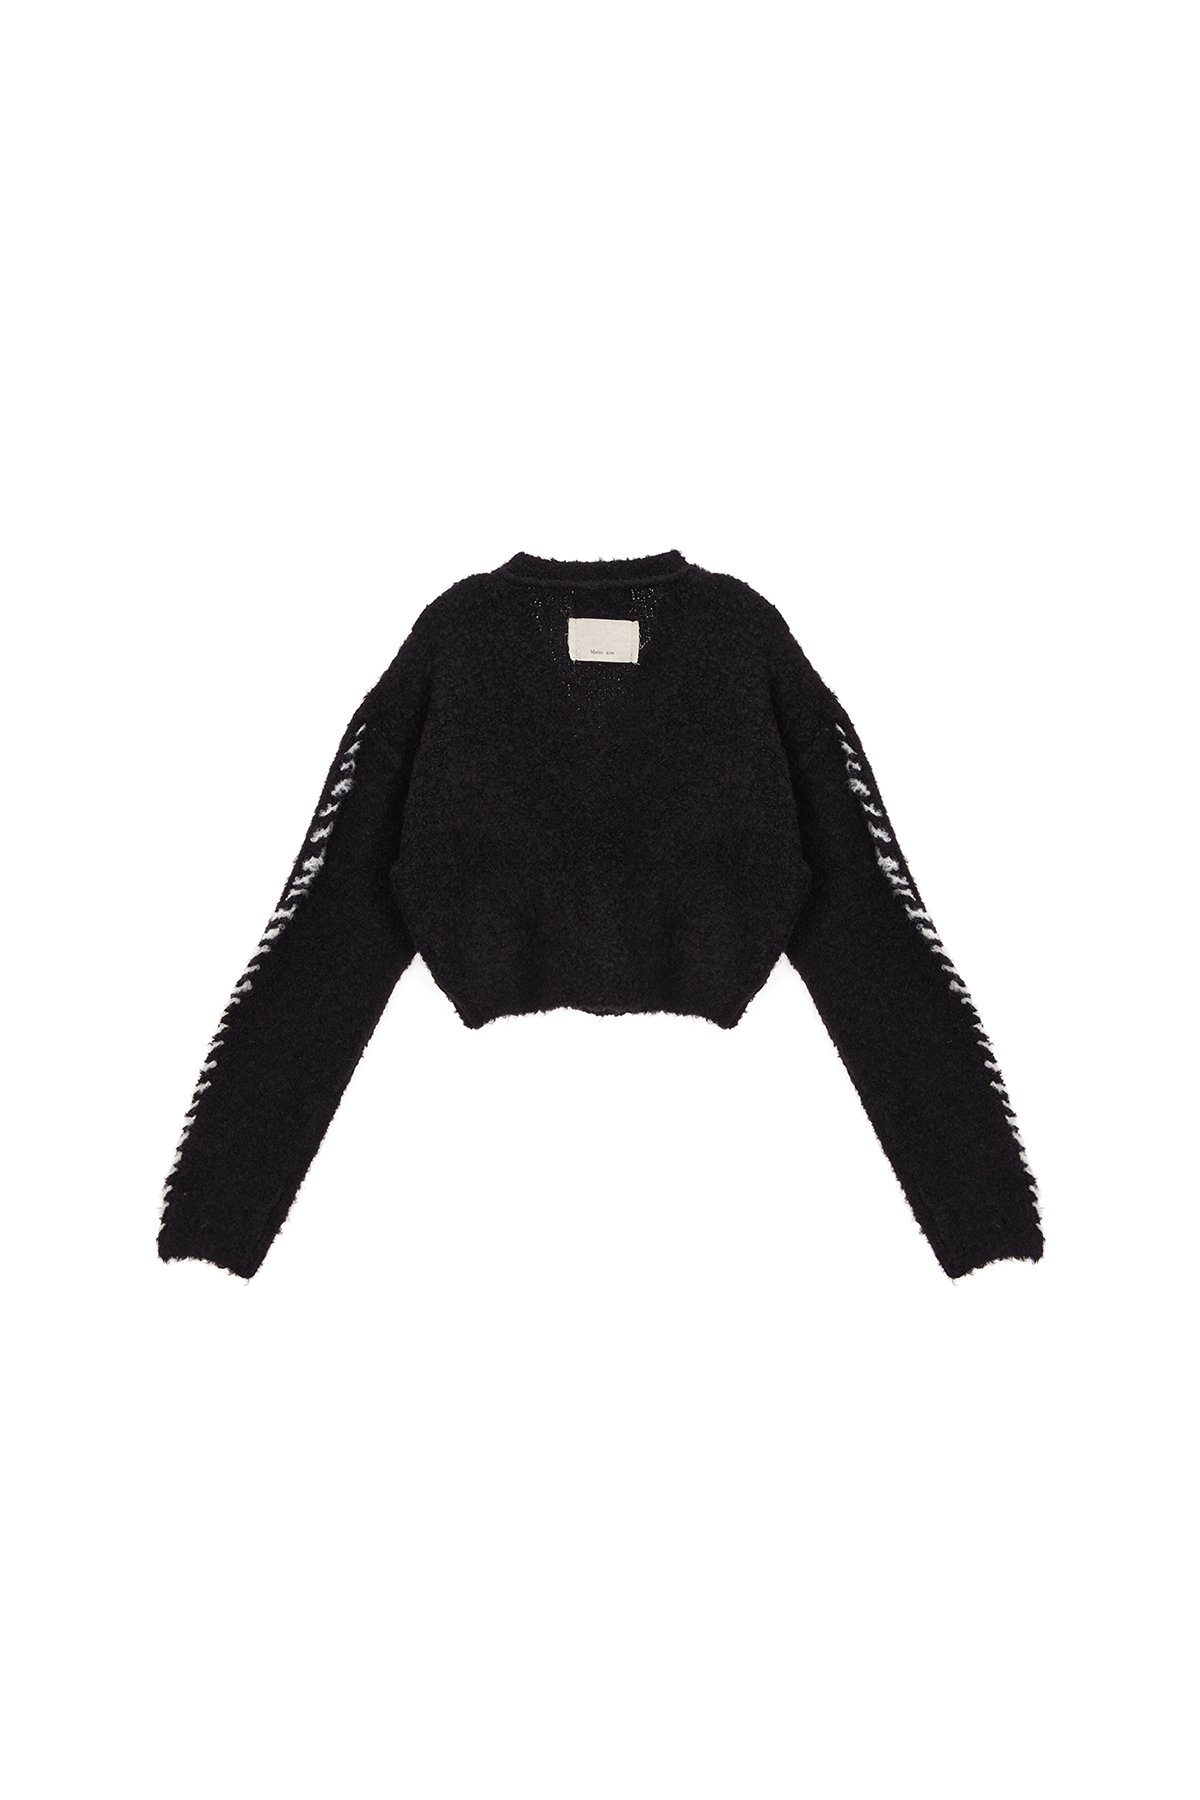 [EXCLUSIVE] SLEEVE STITCH CROP BOUCLE CARDIGAN IN BLACK